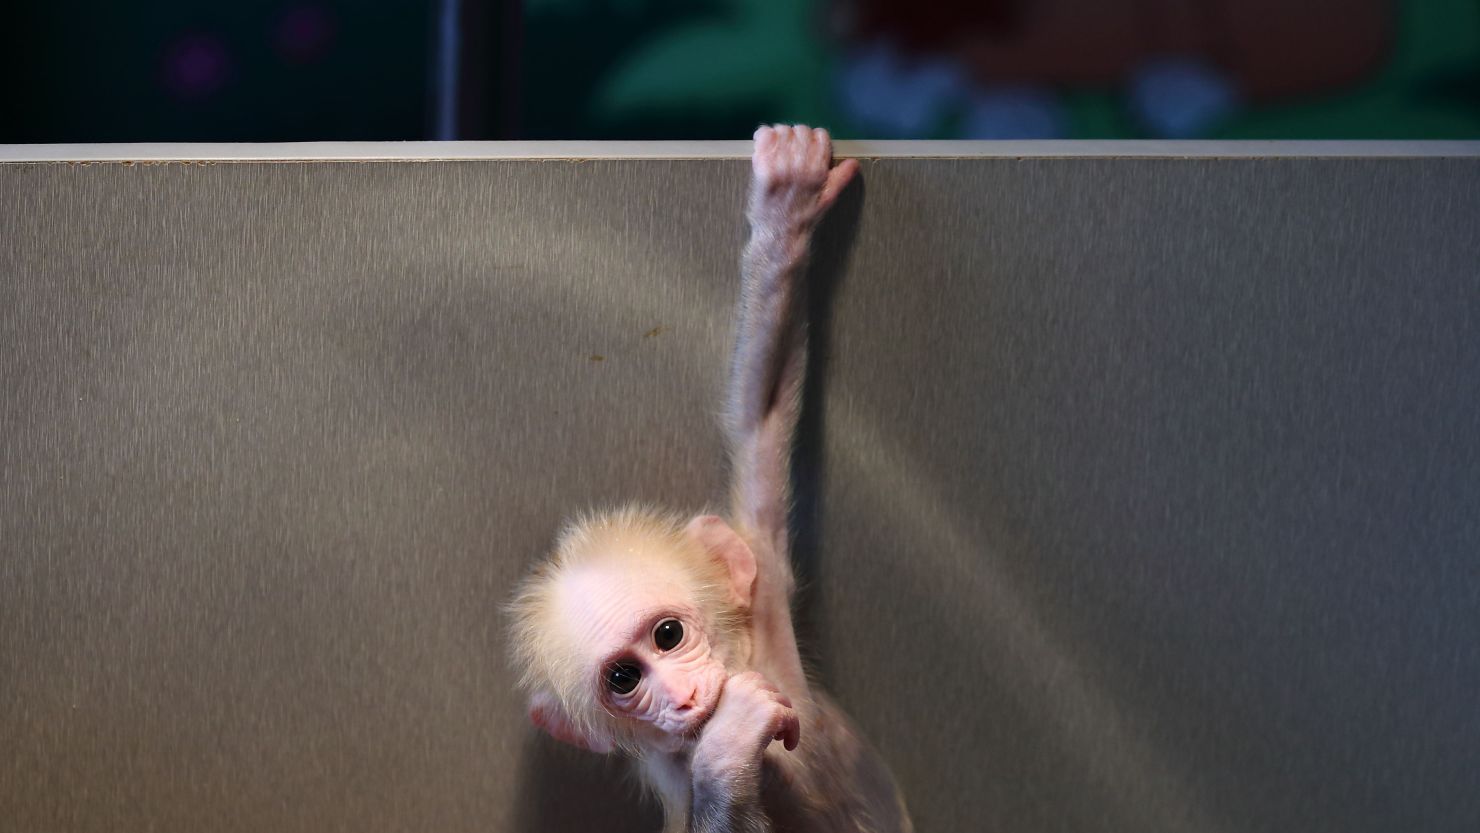 A Human-Monkey Embryo Has Been Created by Scientists, Nature and Wildlife